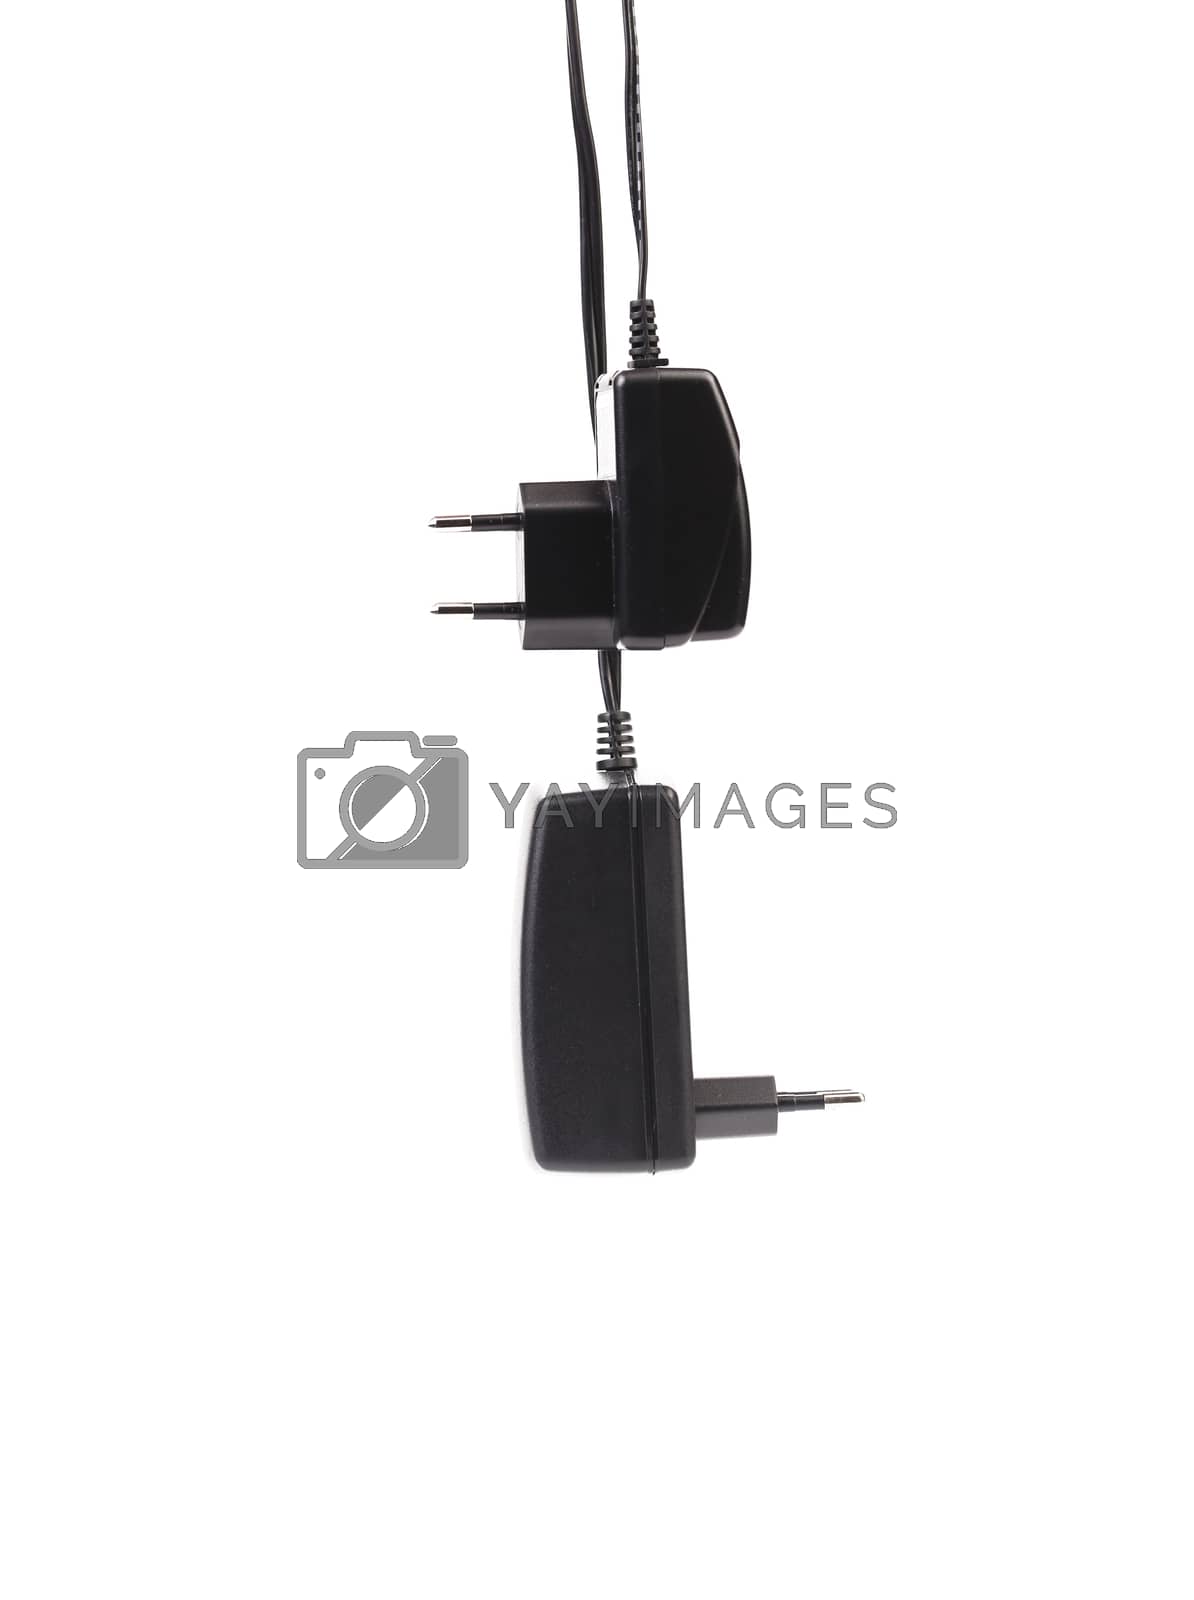 Royalty free image of Electric power adapters. Close up. by indigolotos